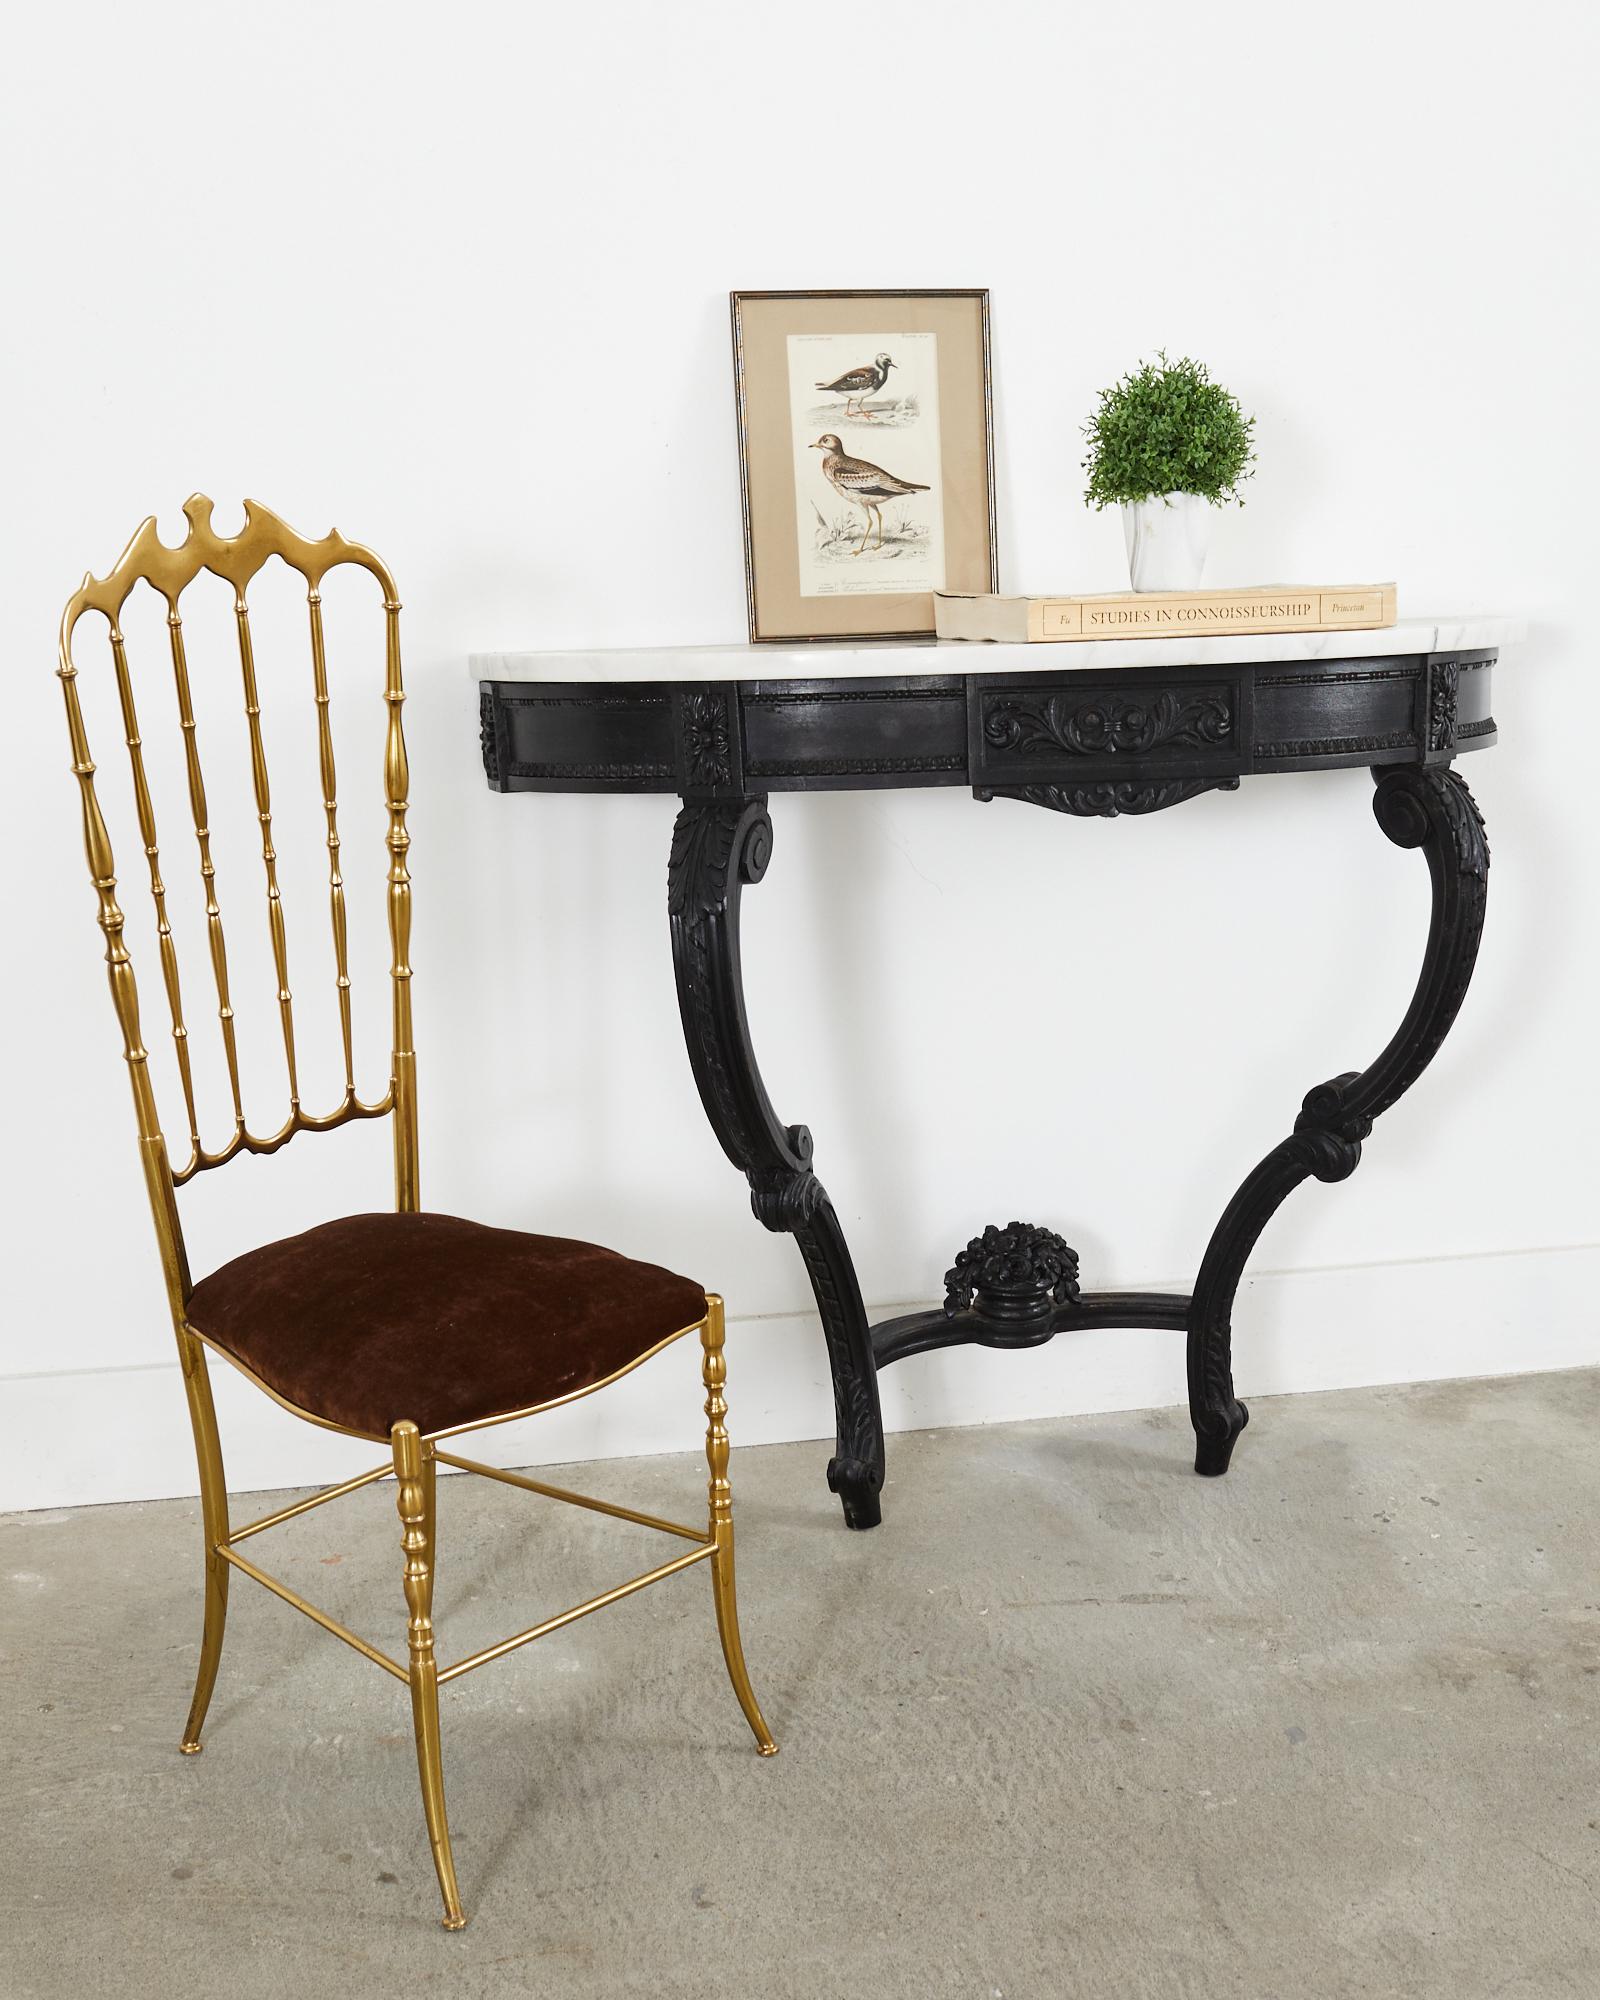 Dramatic black lacquered wall mounted demi-lune console table featuring a conforming Carrara marble top made in the grand French provincial or Louis XV taste with carved rosettes and acanthus decorated frieze. The table is supported by gracefully